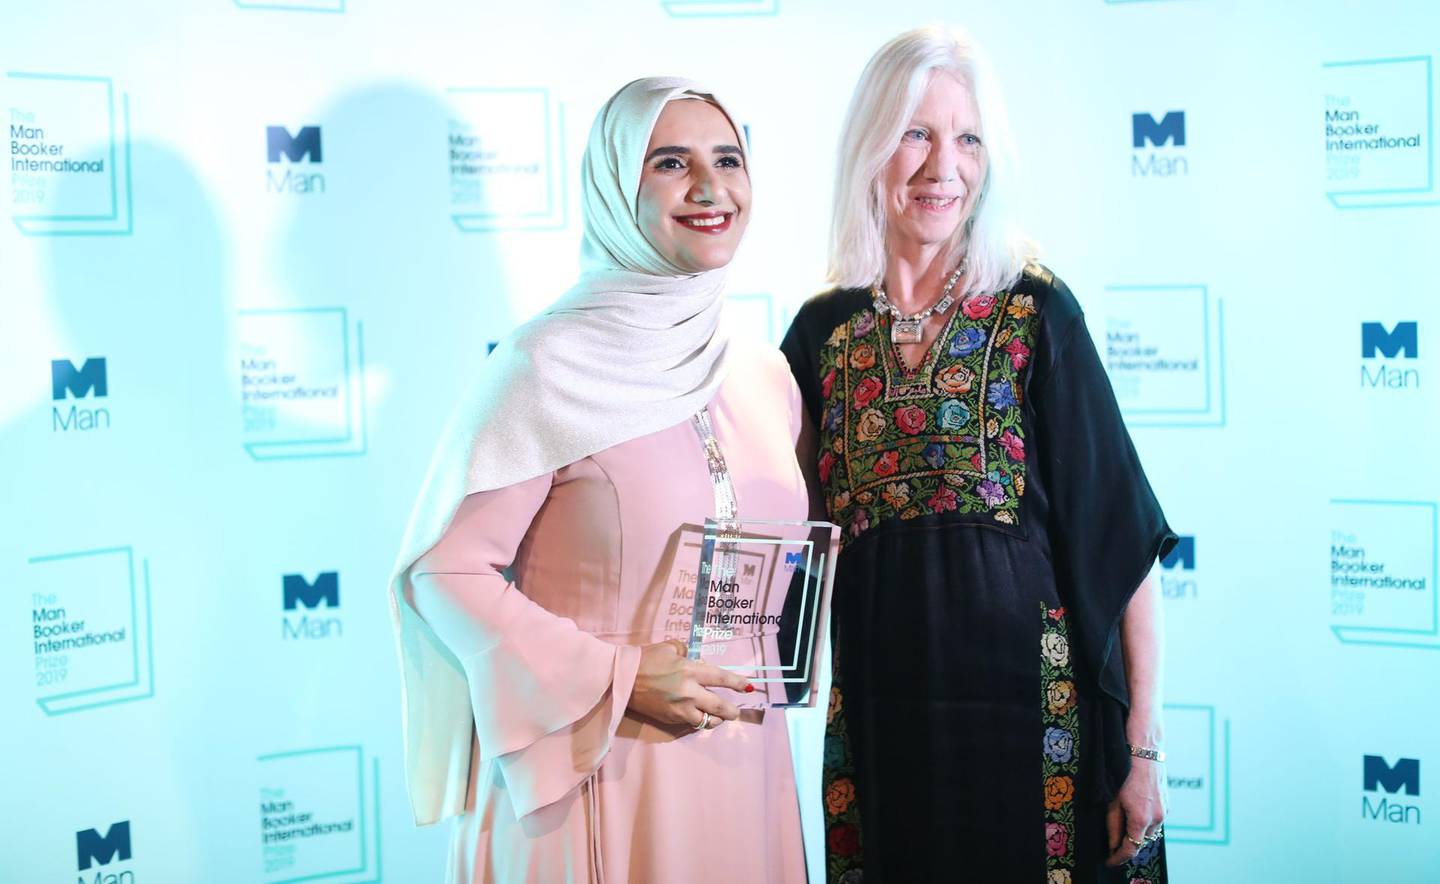 Arabic author Jokha Alharthi (L) and translator Marilyn Booth pose after winning the Man Booker International Prize for the book 'Celestial Bodies' in London on May 21, 2019.   / AFP / Isabel INFANTES
